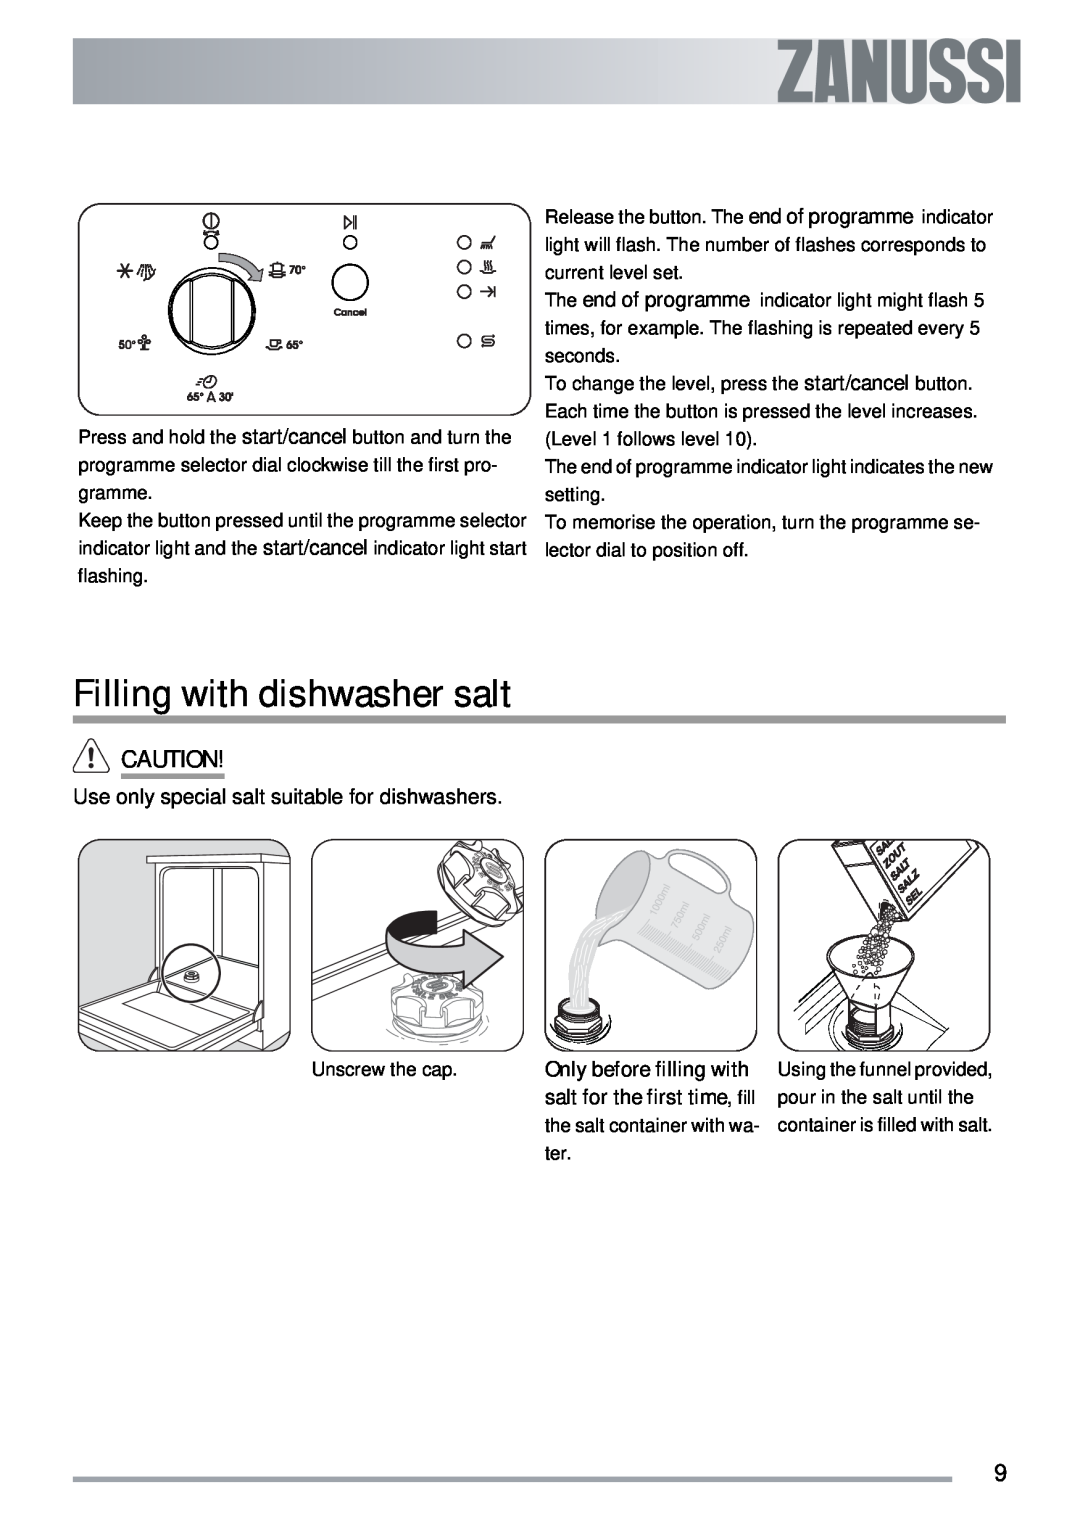 Zanussi ZDI 122 user manual Filling with dishwasher salt, Use only special salt suitable for dishwashers 